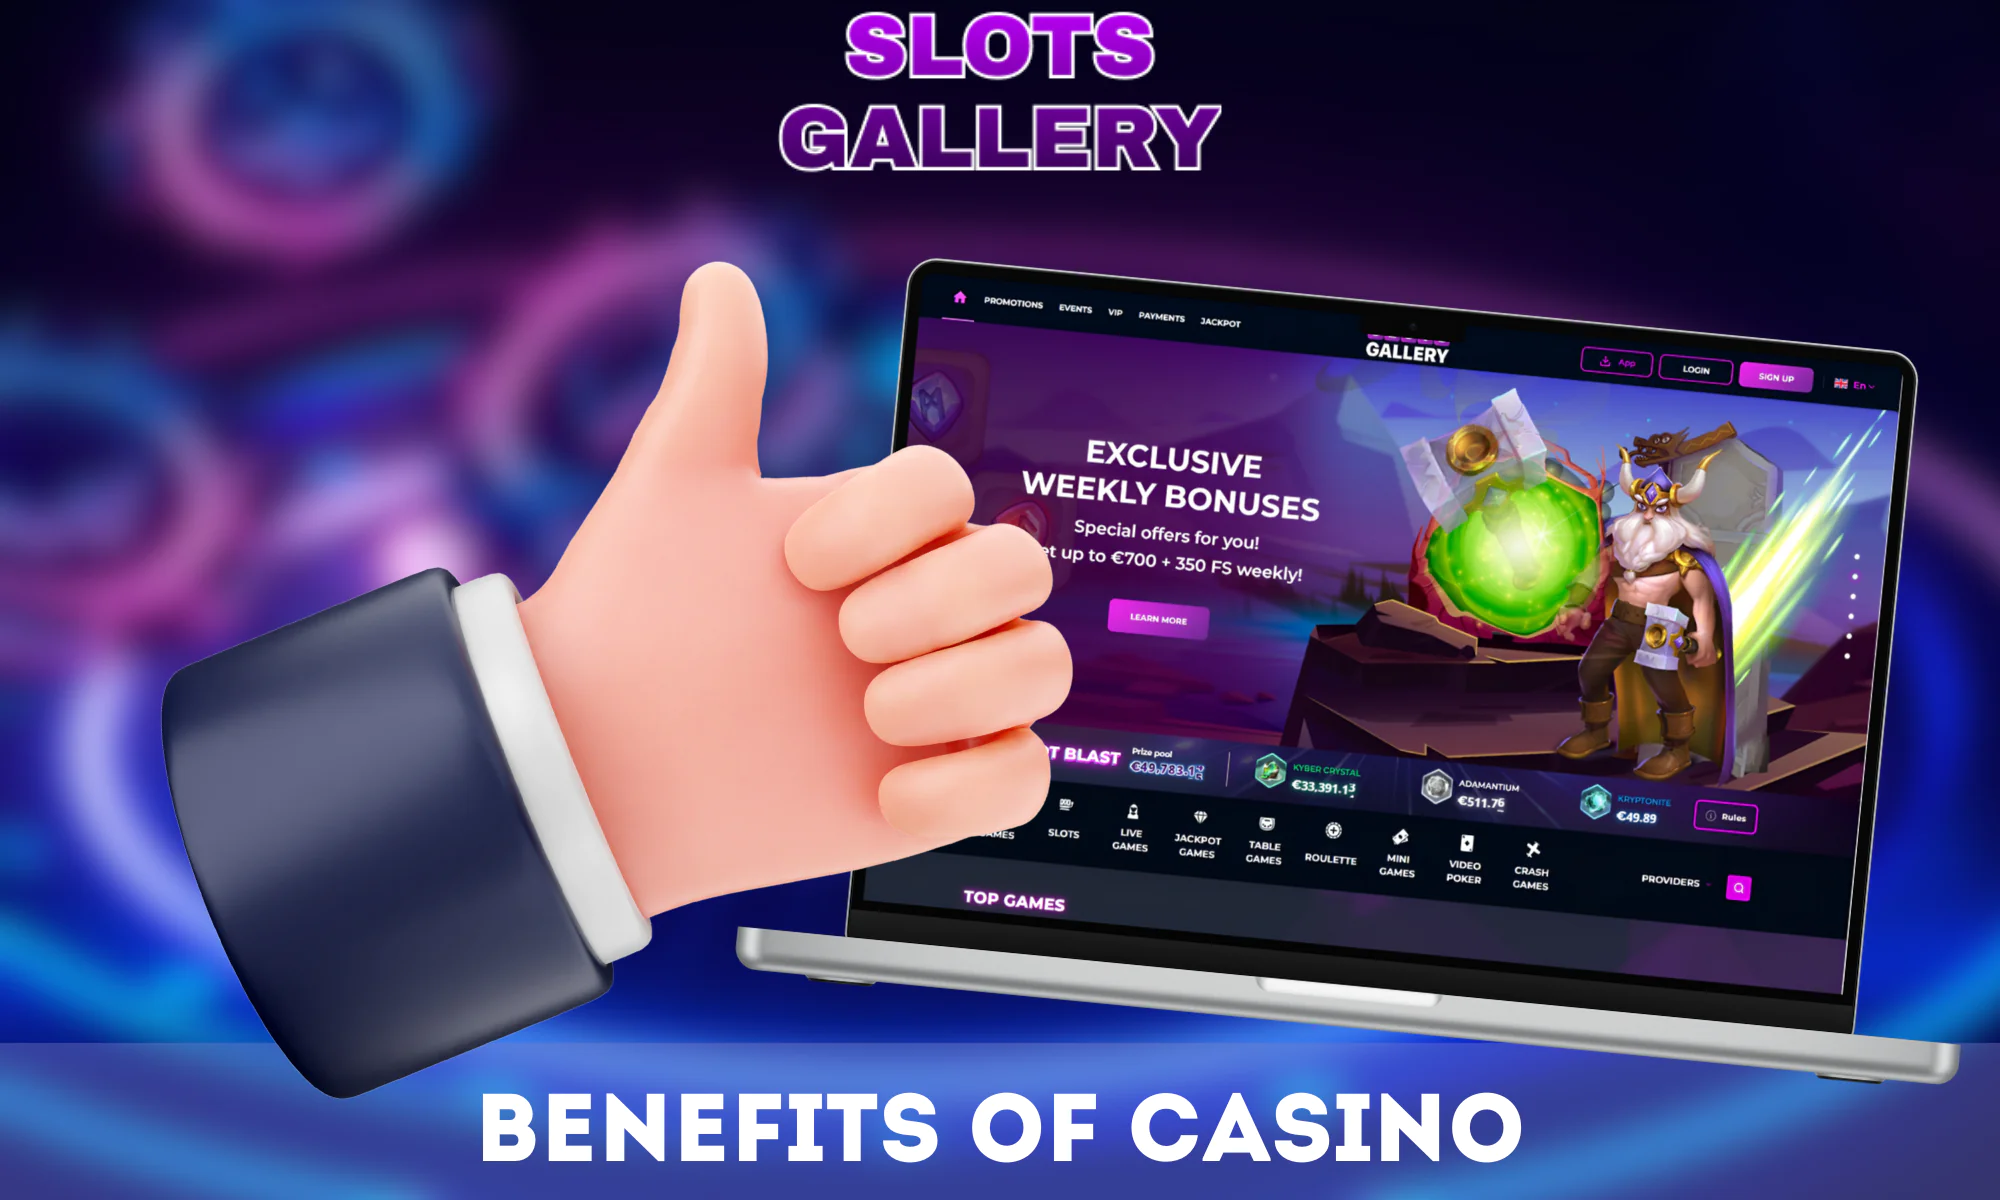 The Slots Gallery offers many benefits for players from New Zealand